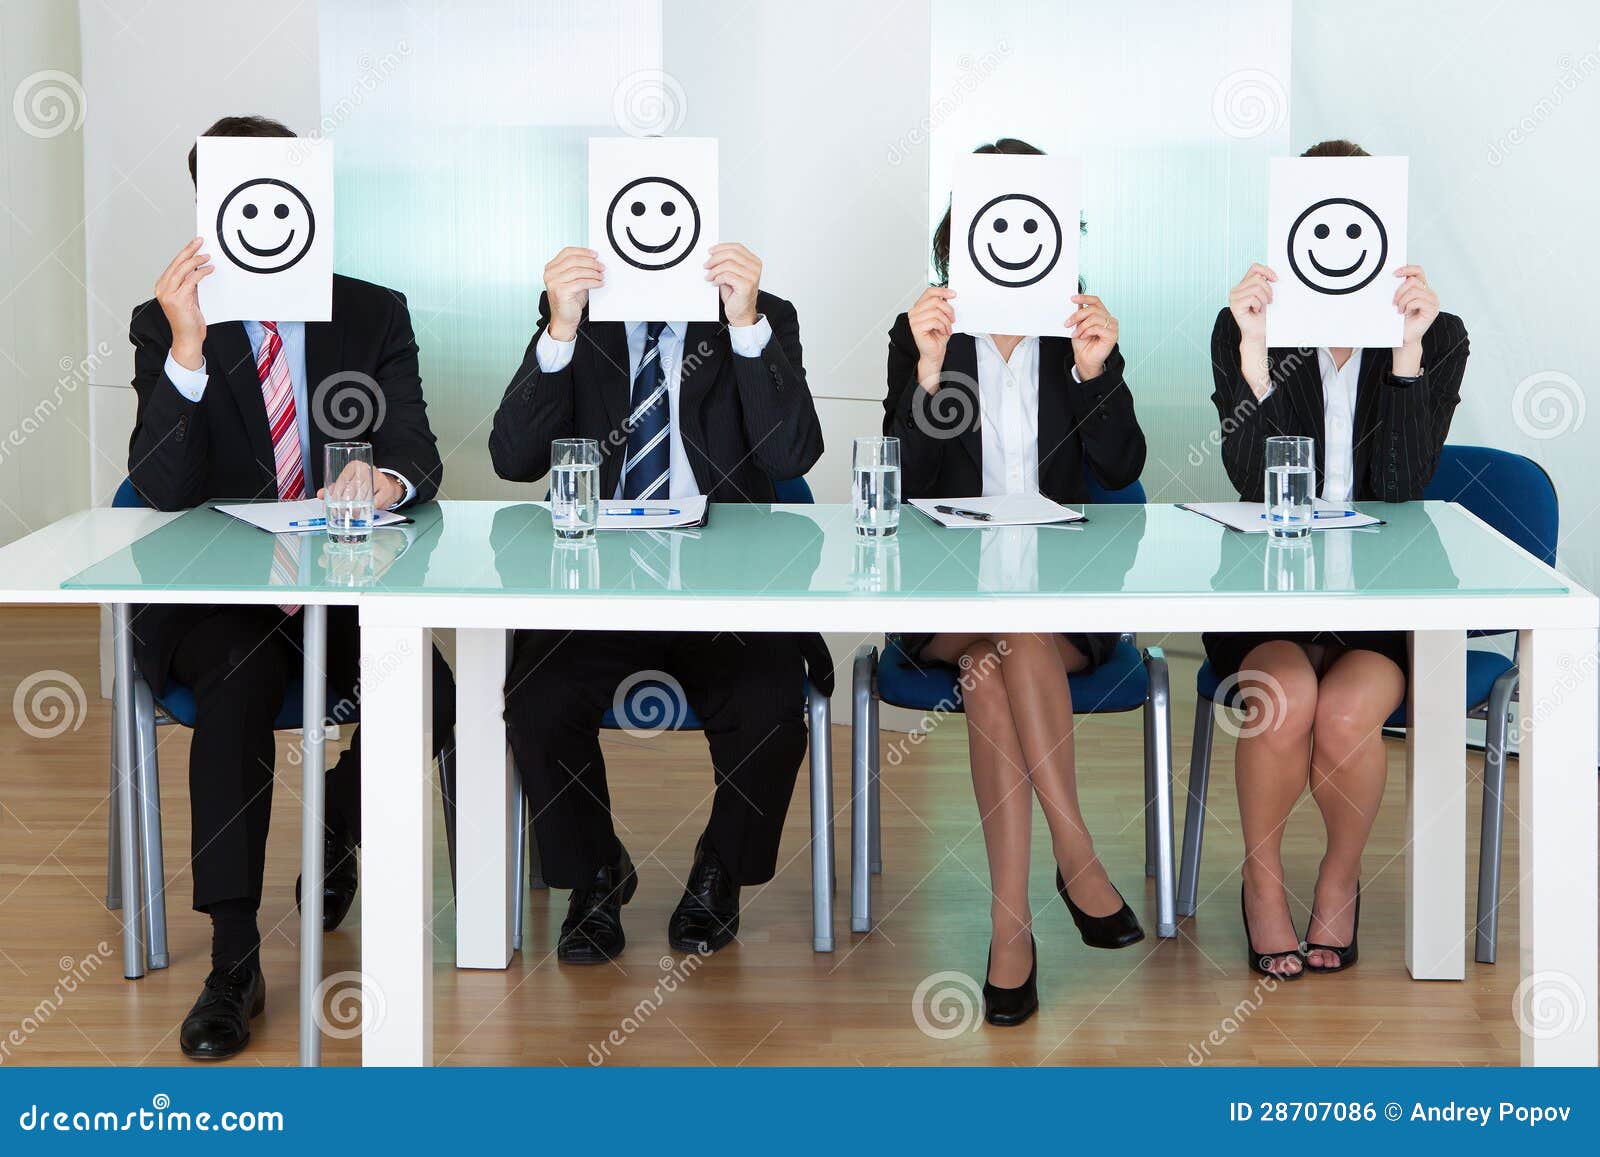 row of business executives with smiley faces